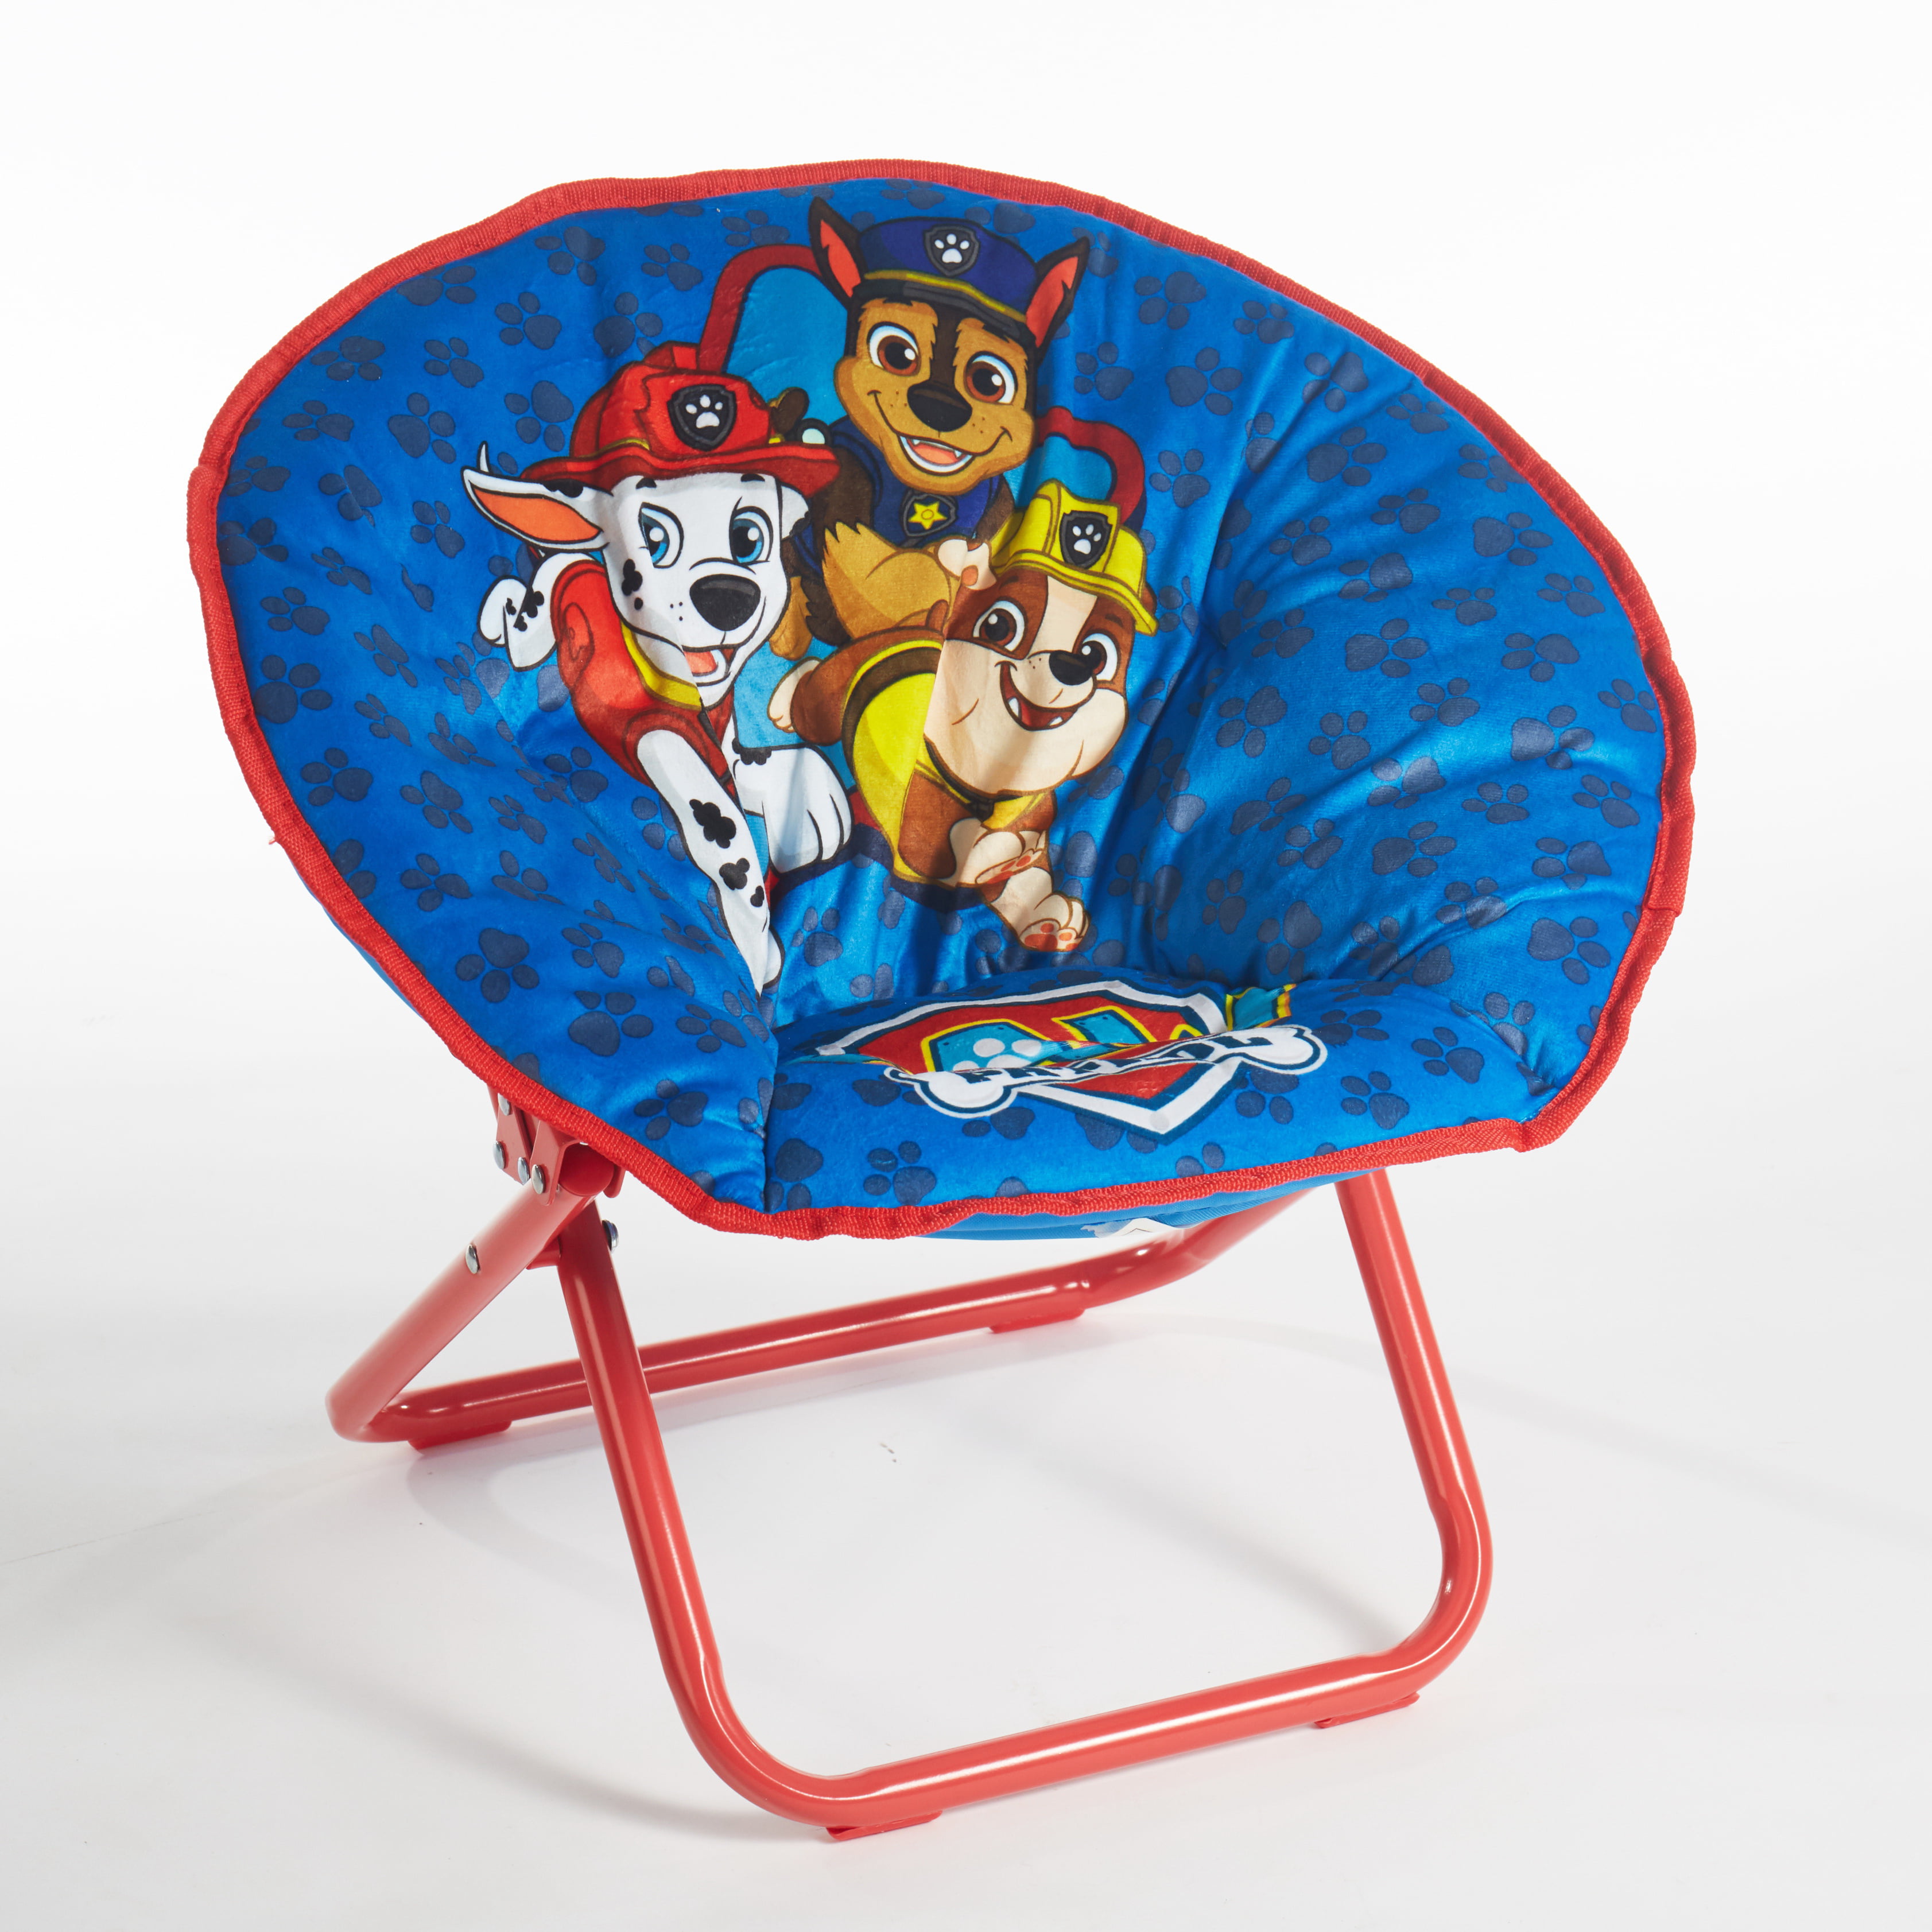 Paw Patrol Pink Kids Garden Chair Comfortable With A Safety Lock and Suitable For Both Indoors and Outdoors/Children Garden Decor/Children Flashy Chair With Cartoon Character Designs 